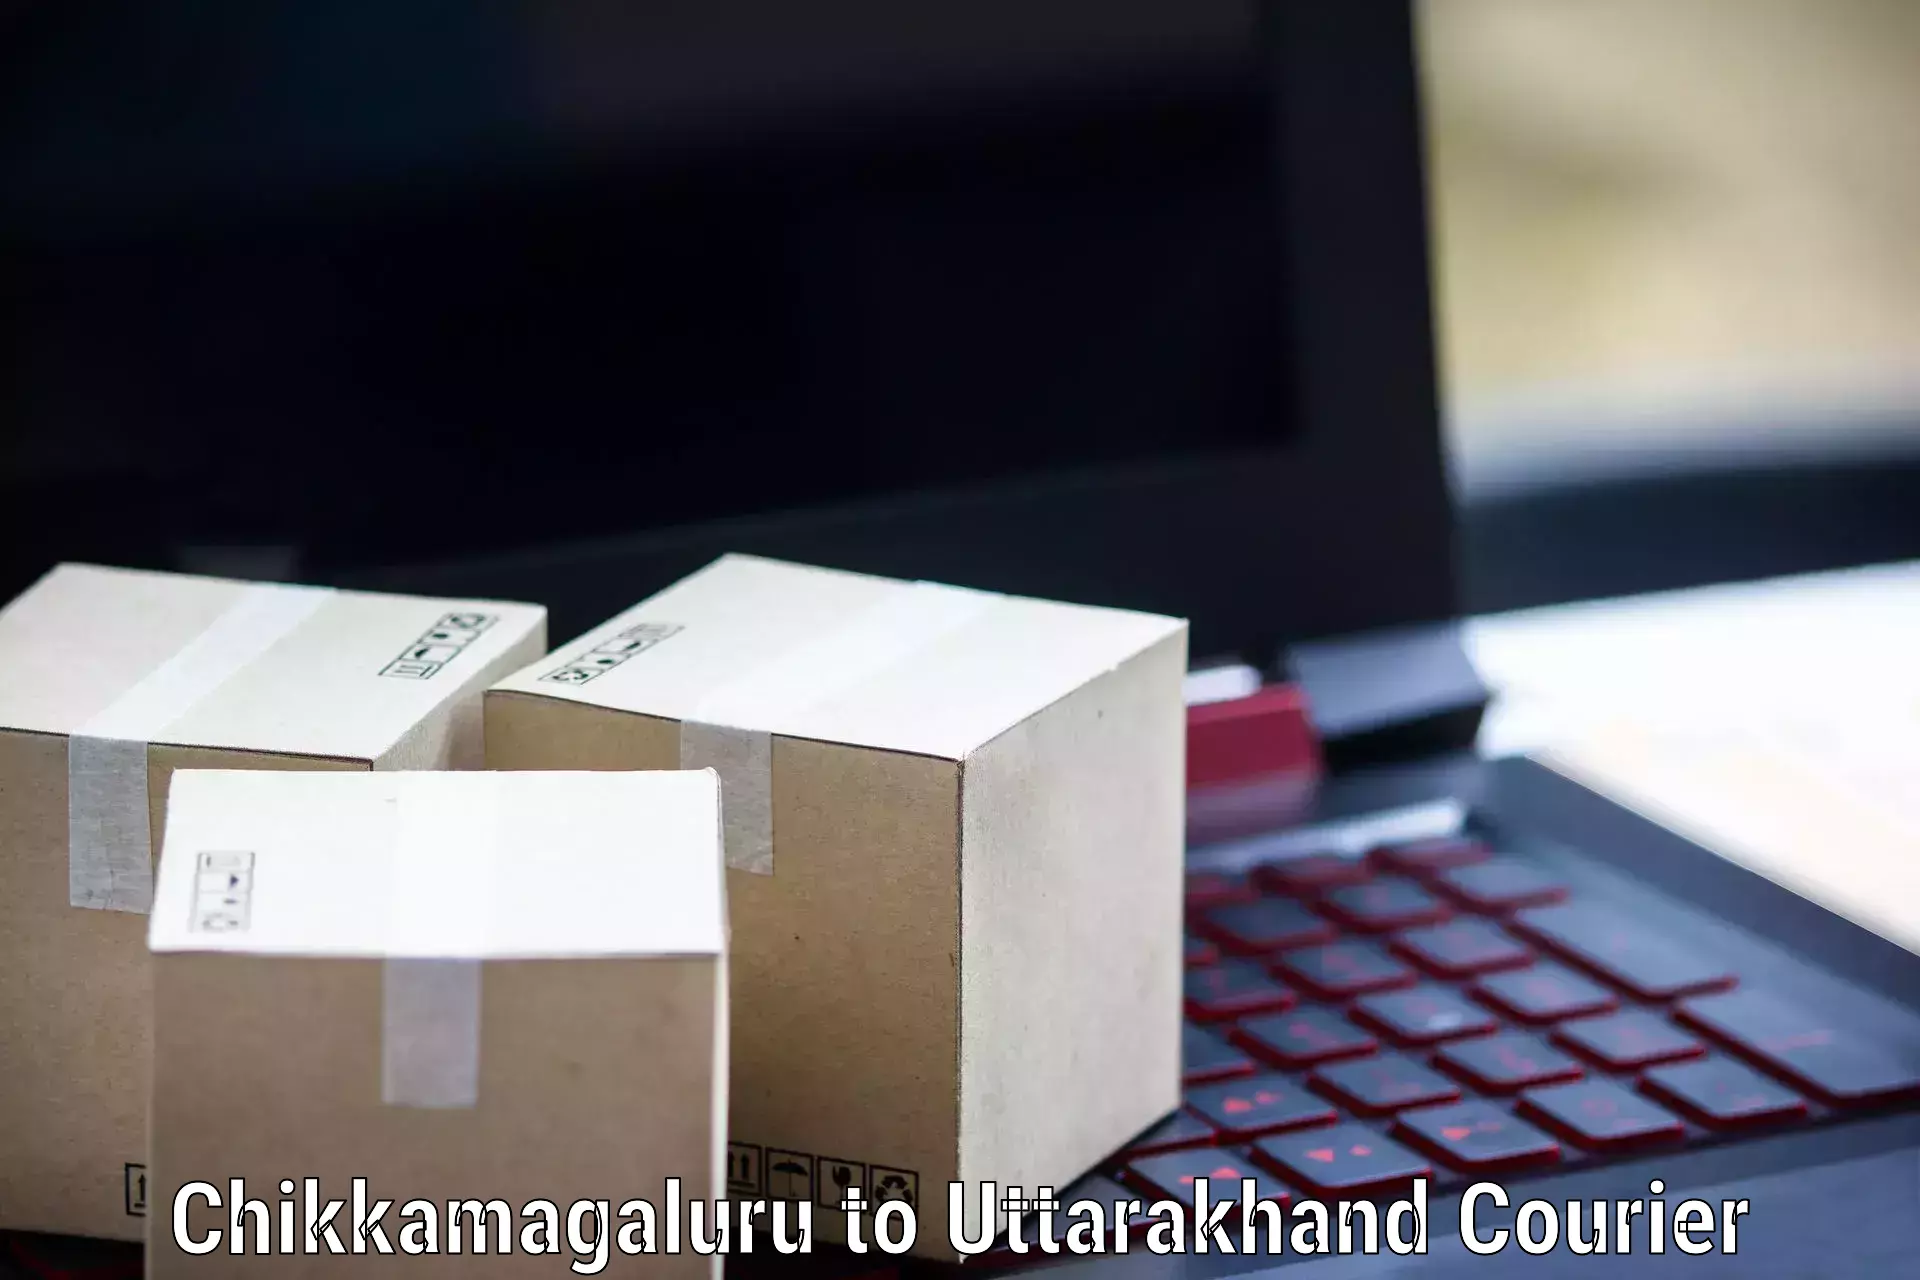 High-capacity parcel service Chikkamagaluru to Roorkee